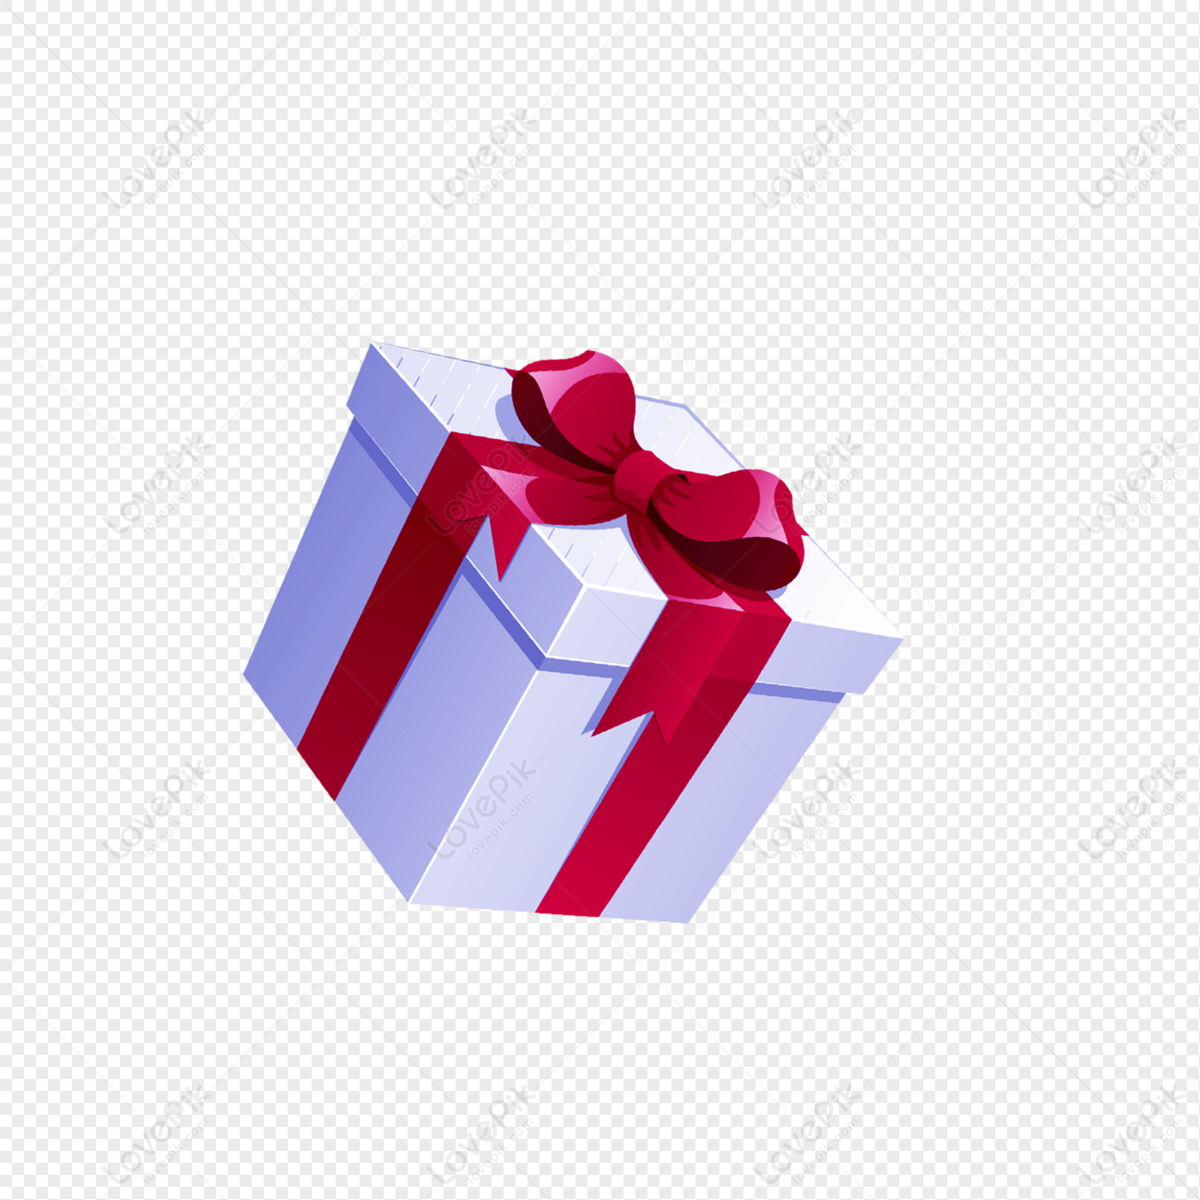 Open gift box with confetti Royalty Free Vector Image